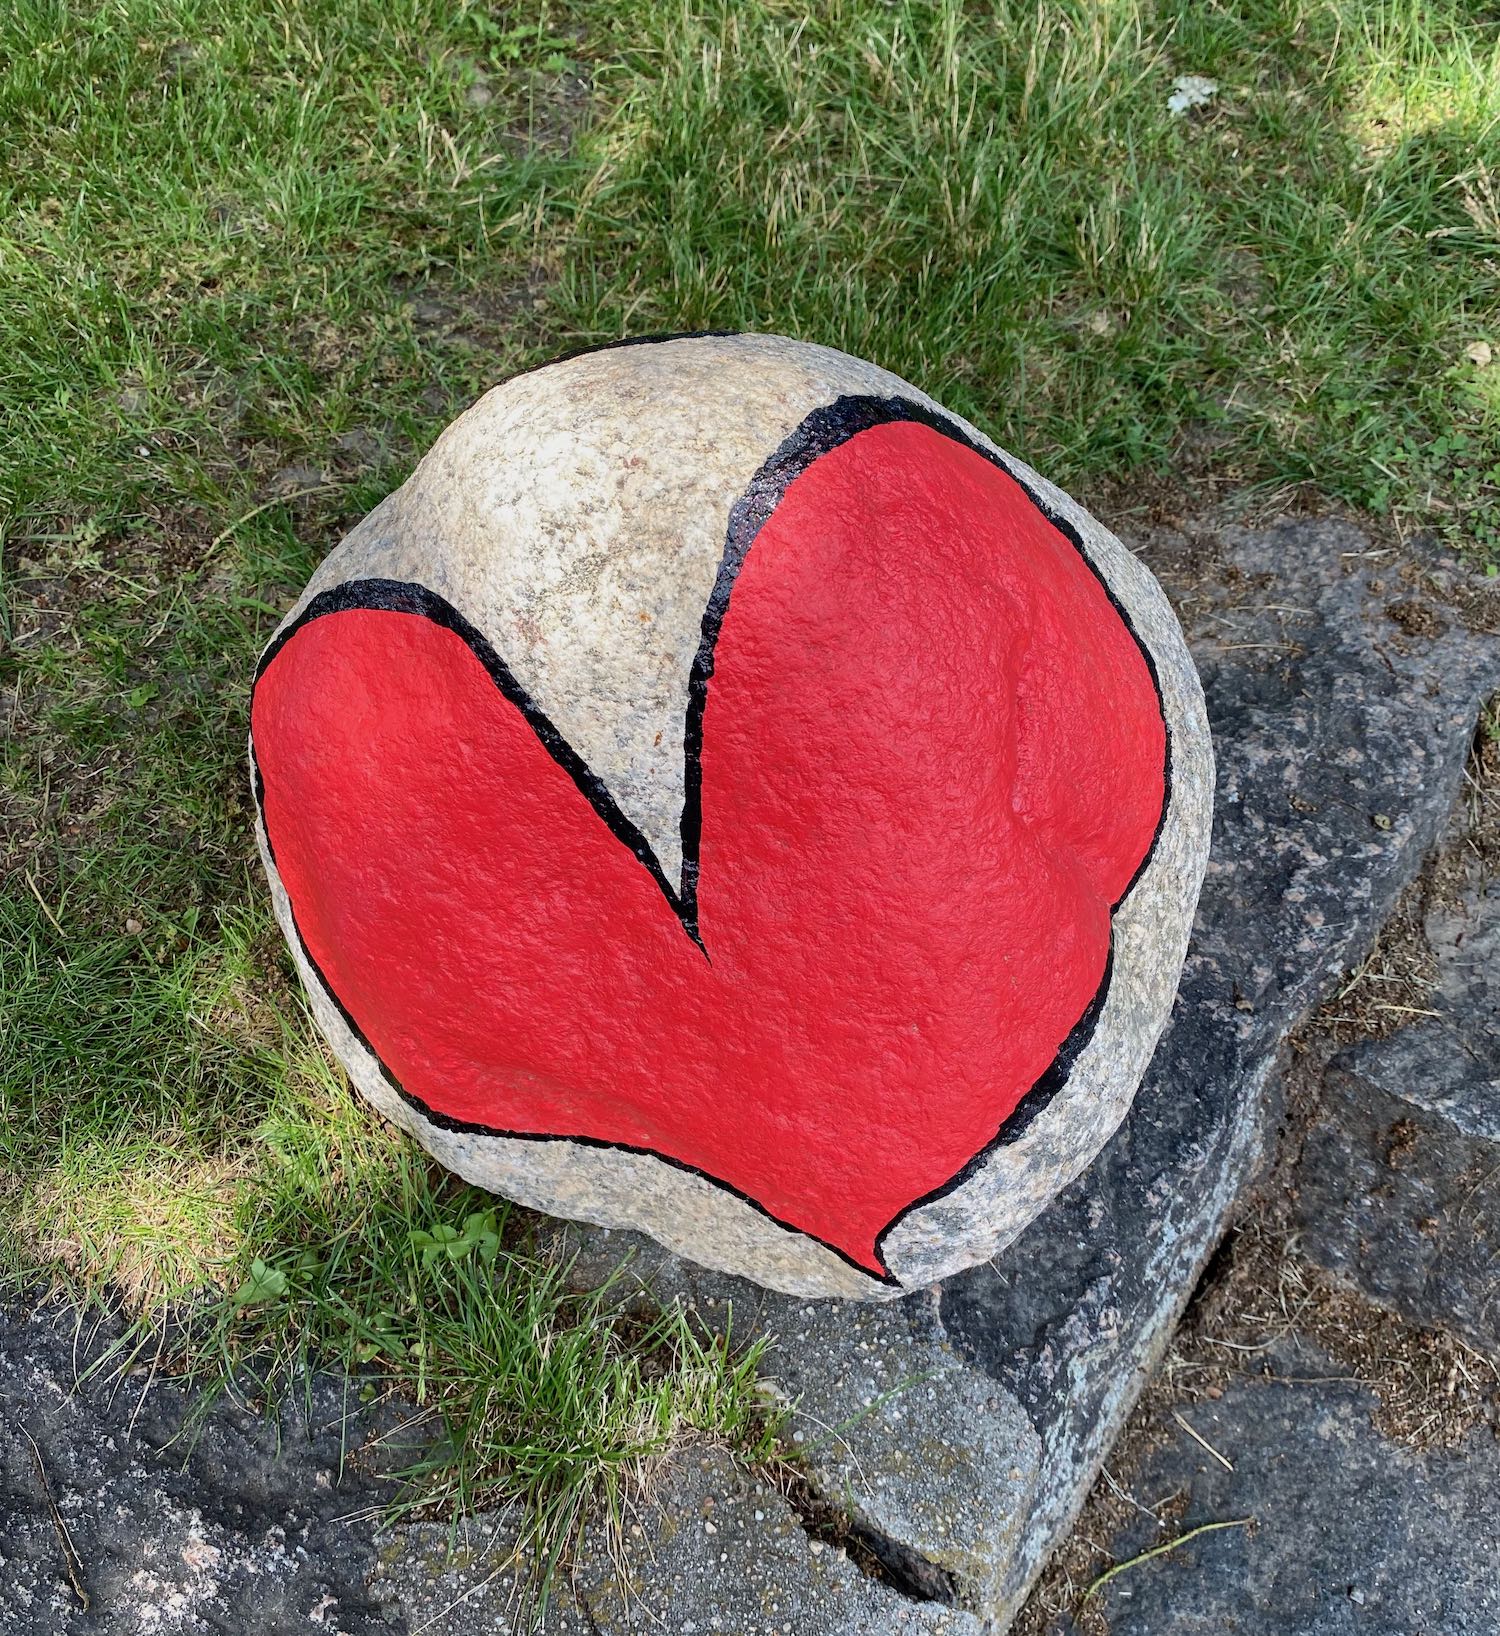 It's the weekend! Number 234, A Rock Painted with a Heart Outside the Woods Hole Public Library in Woods Hole, MA